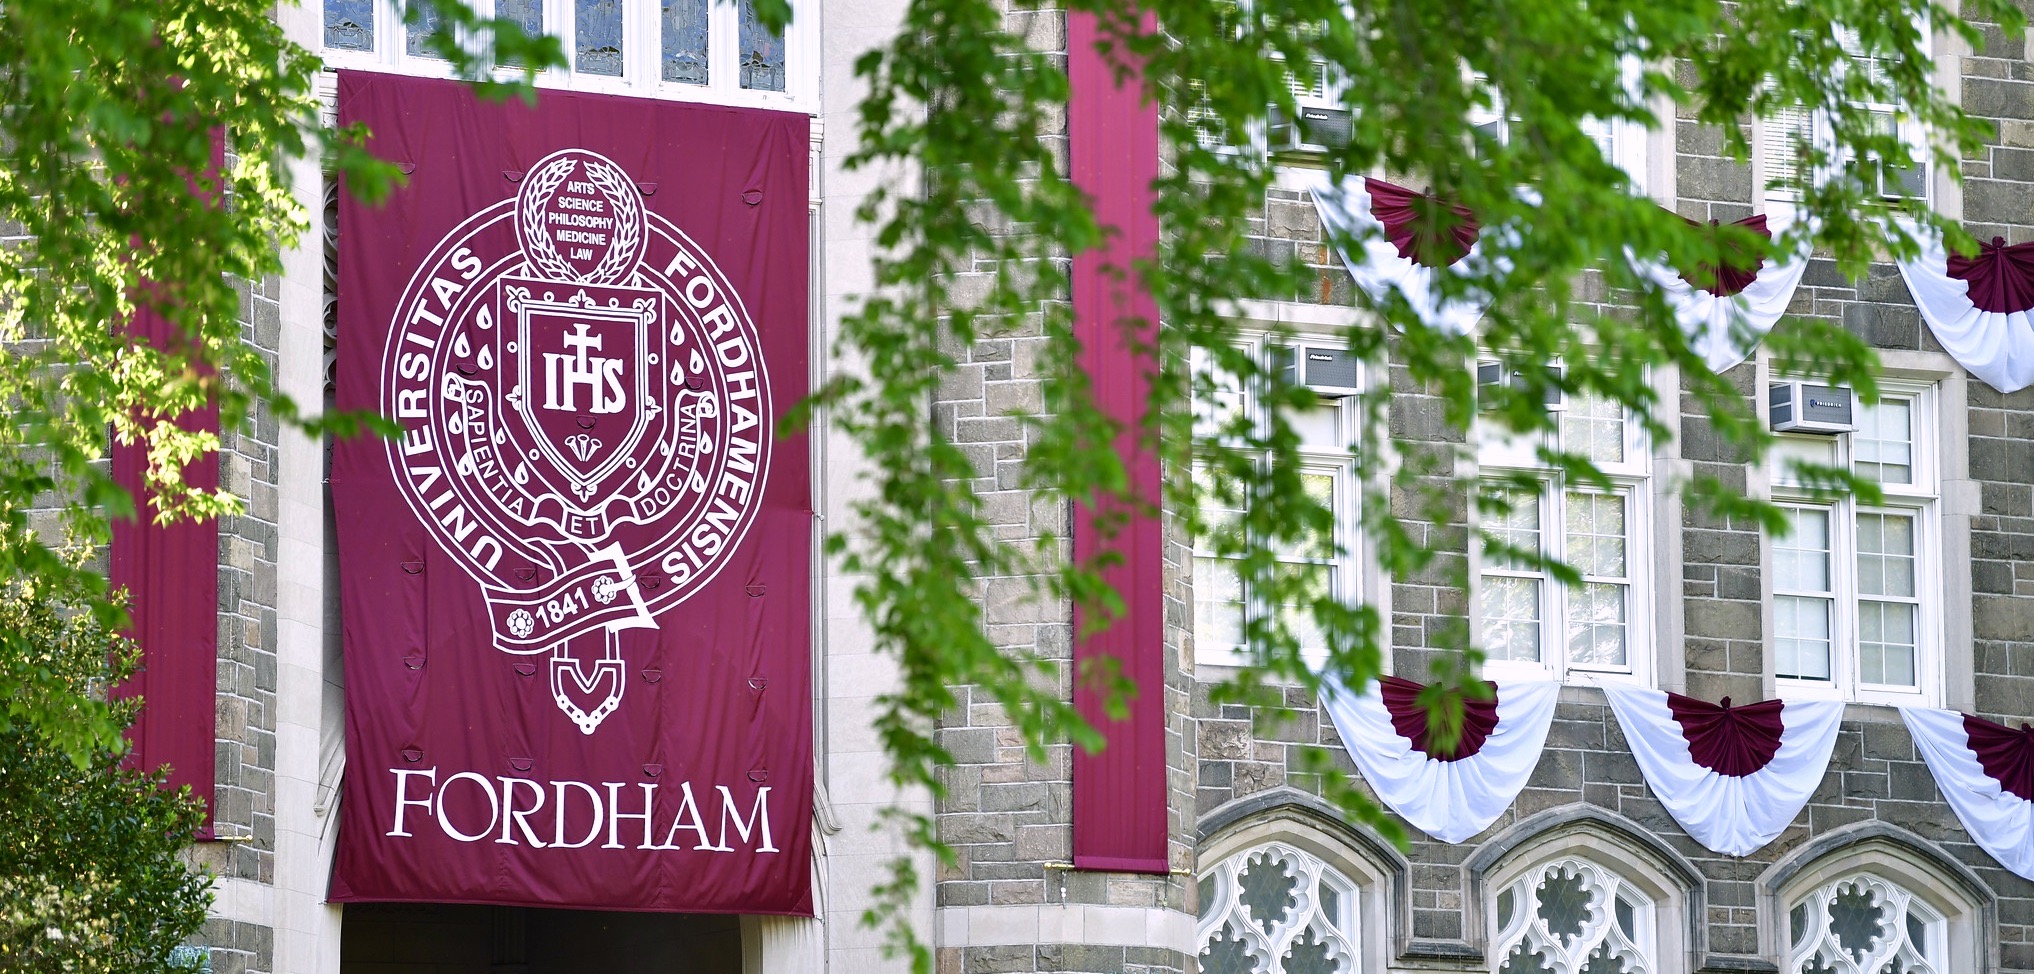 A maroon banner that says "Fordham" hangs in front of a building with leaves next to it.